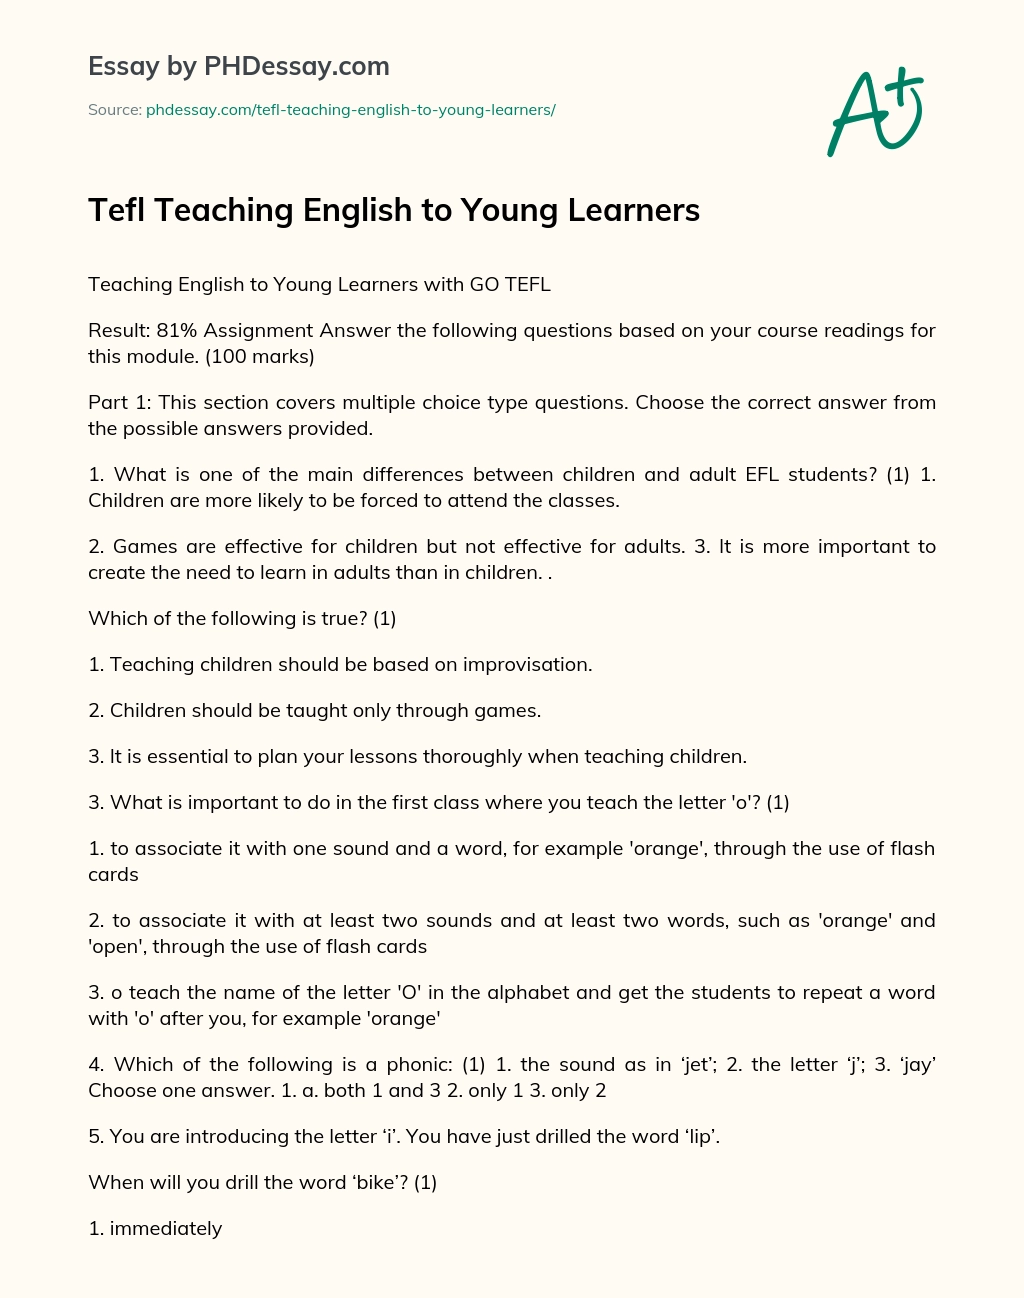 Tefl Teaching English to Young Learners essay